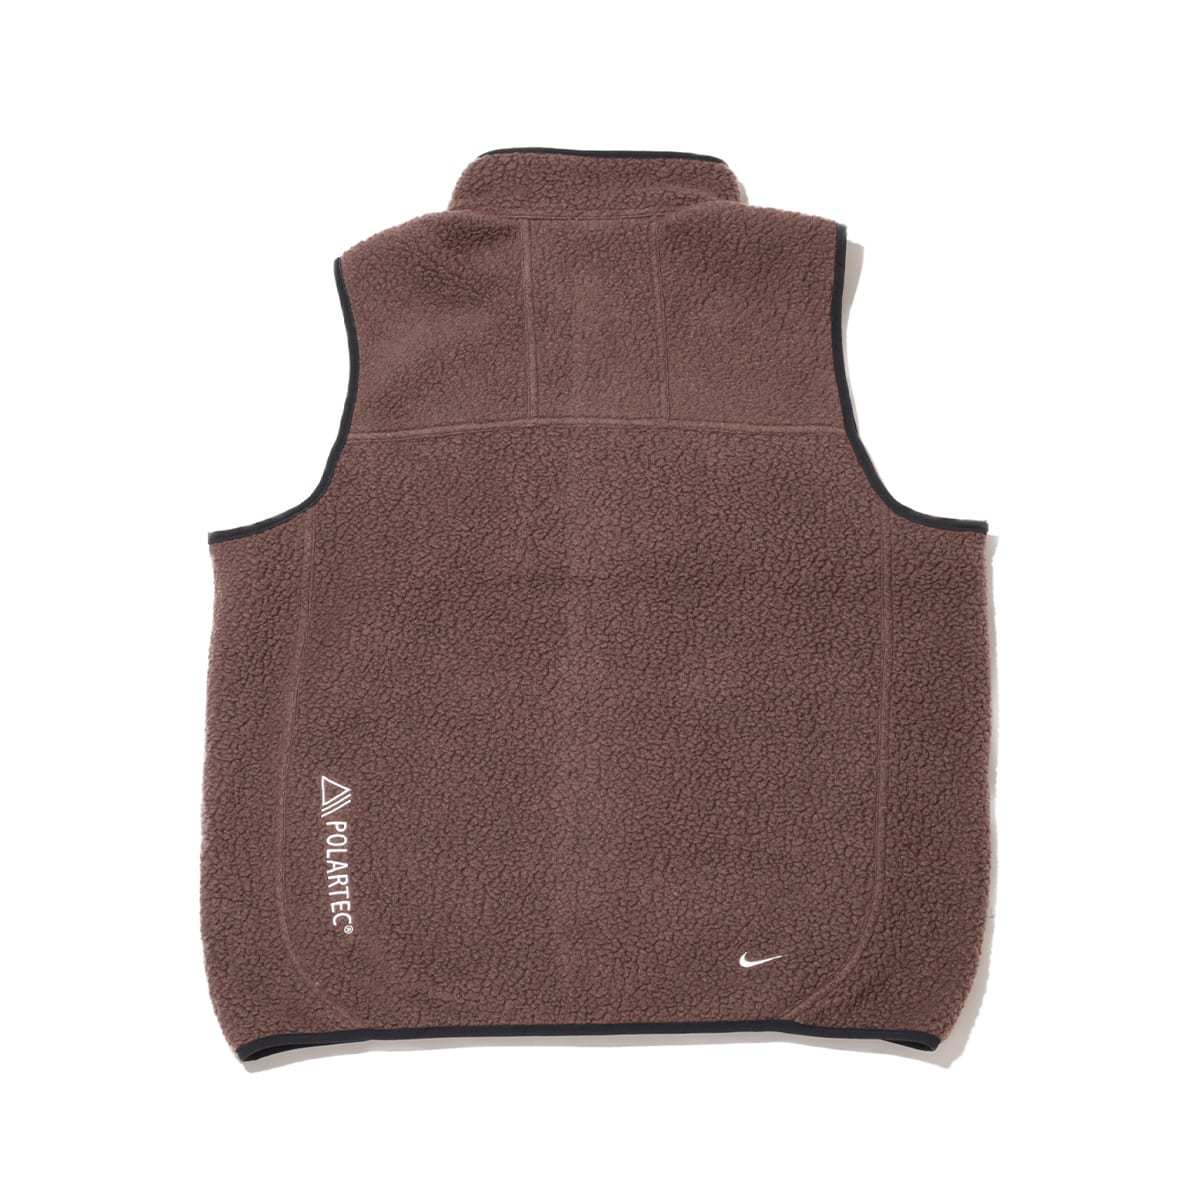 NIKE AS M ACG ARCTIC WOLF VEST BAROQUE BROWN/BLACK/SUMMIT WHITE 24SP-I